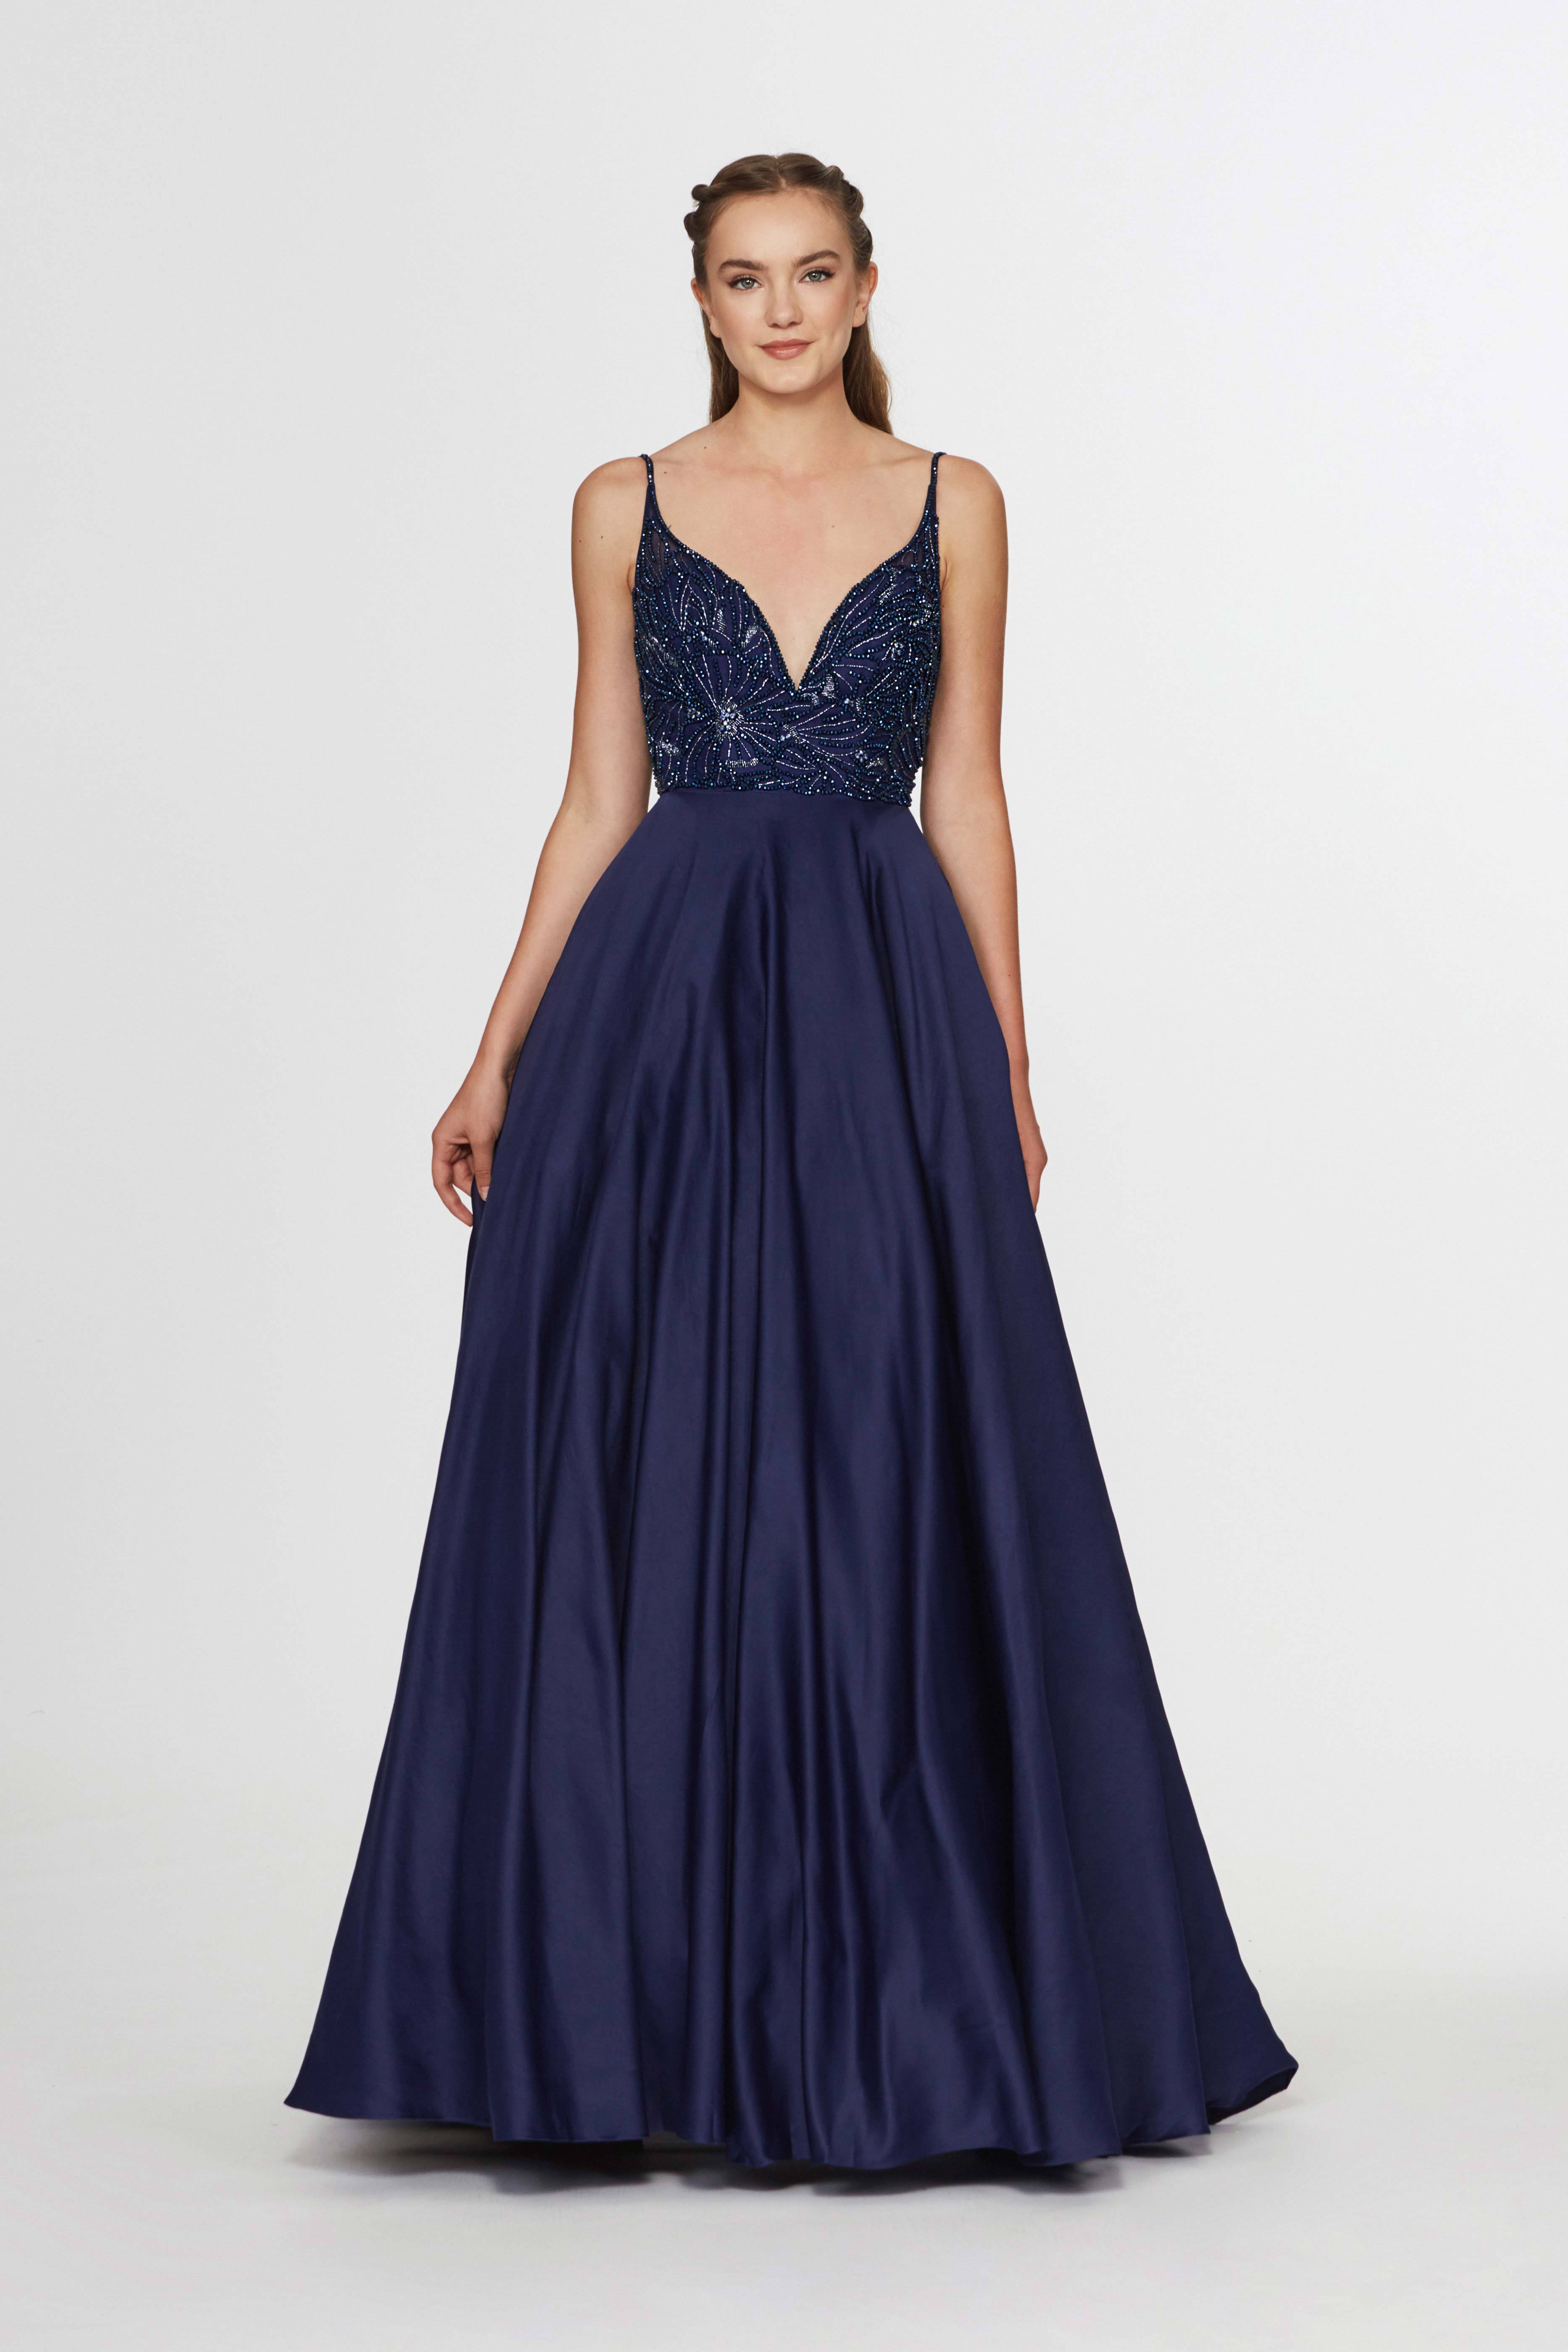 Image of Angela & Alison - 91001 Sleeveless Low Scoop Back Beaded Satin Gown